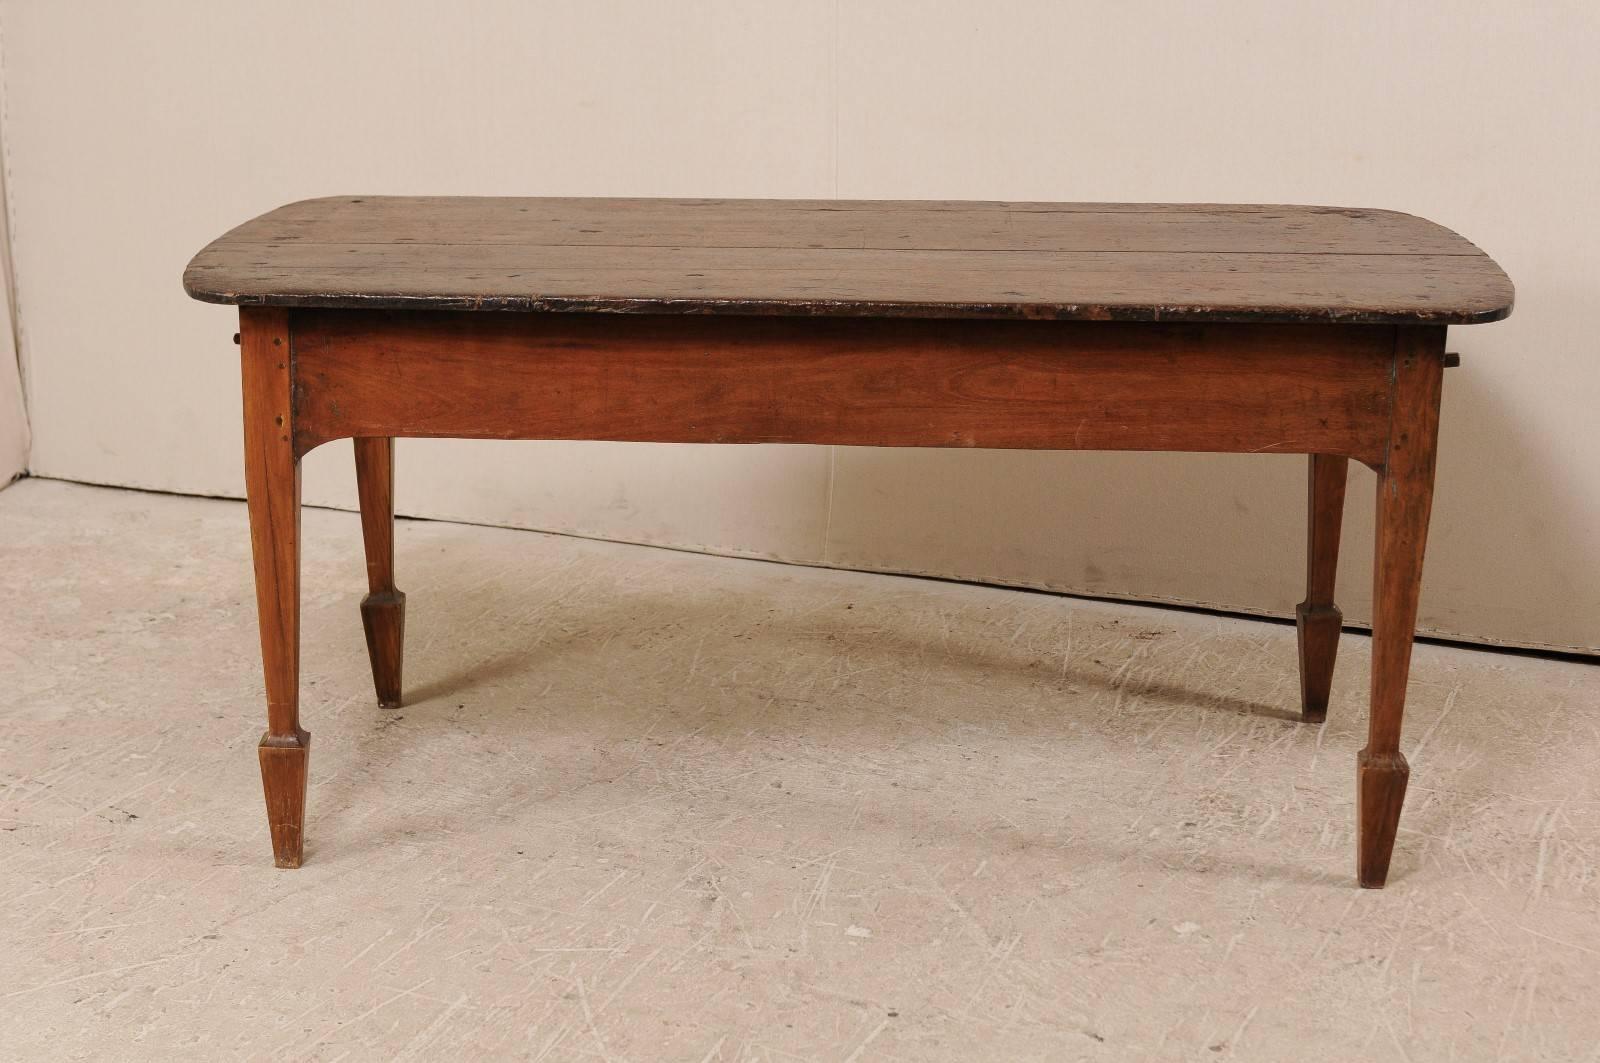 Early 20th Century Brazilian Peroba Wood Table with Two Drawers and Spaded Feet 3